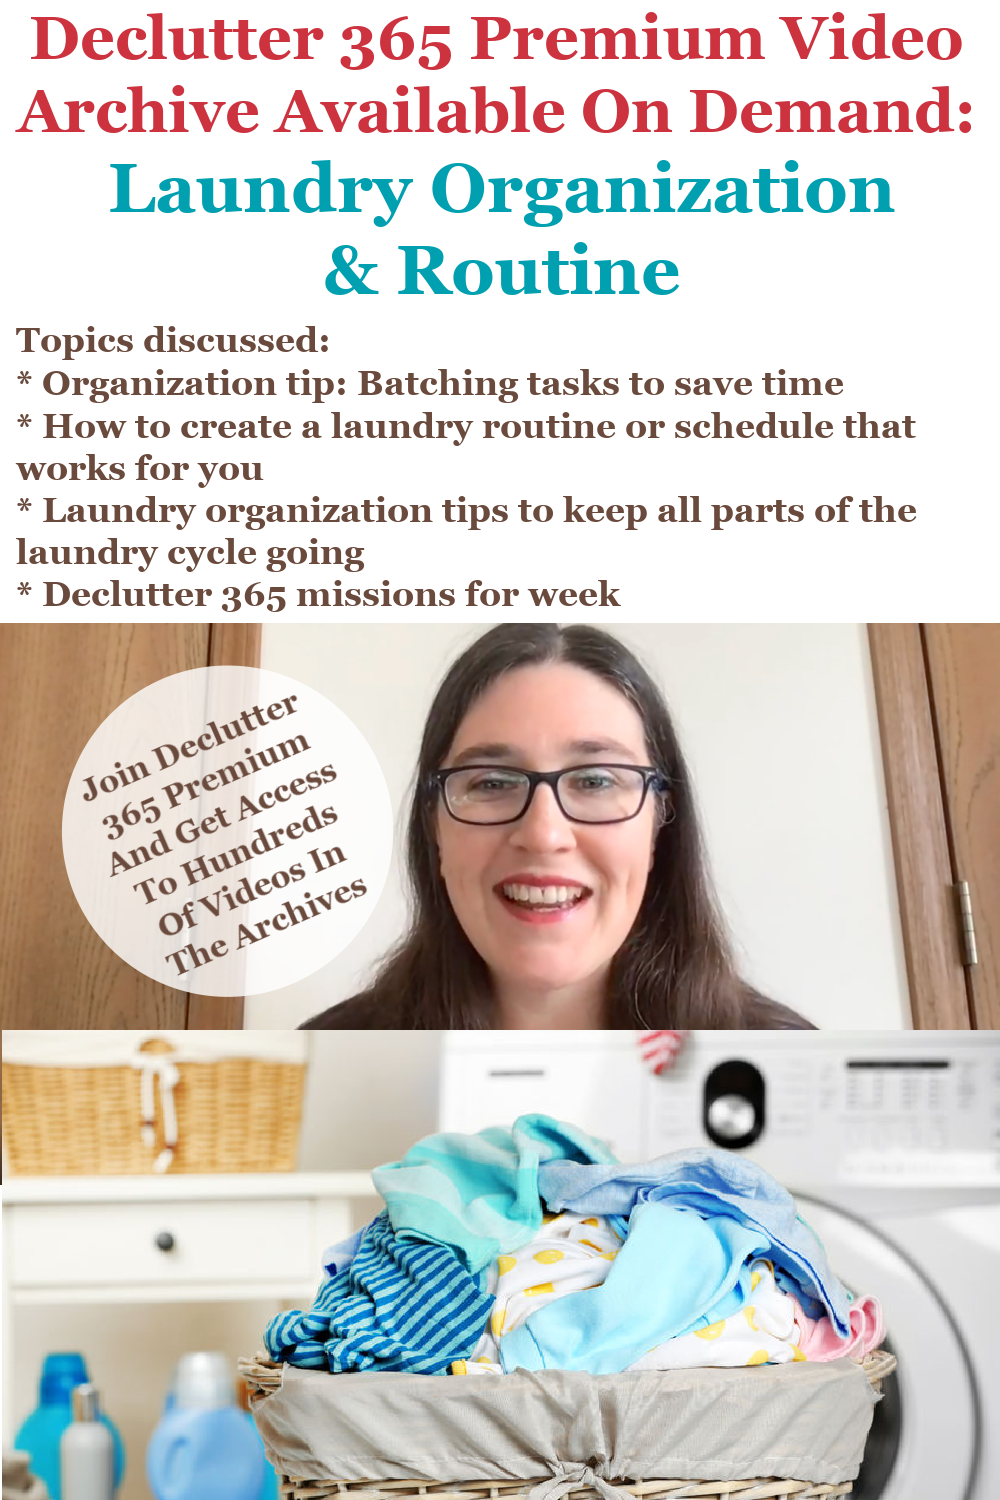 How To Organize Laundry Room with Unique Features - The Organized Mama